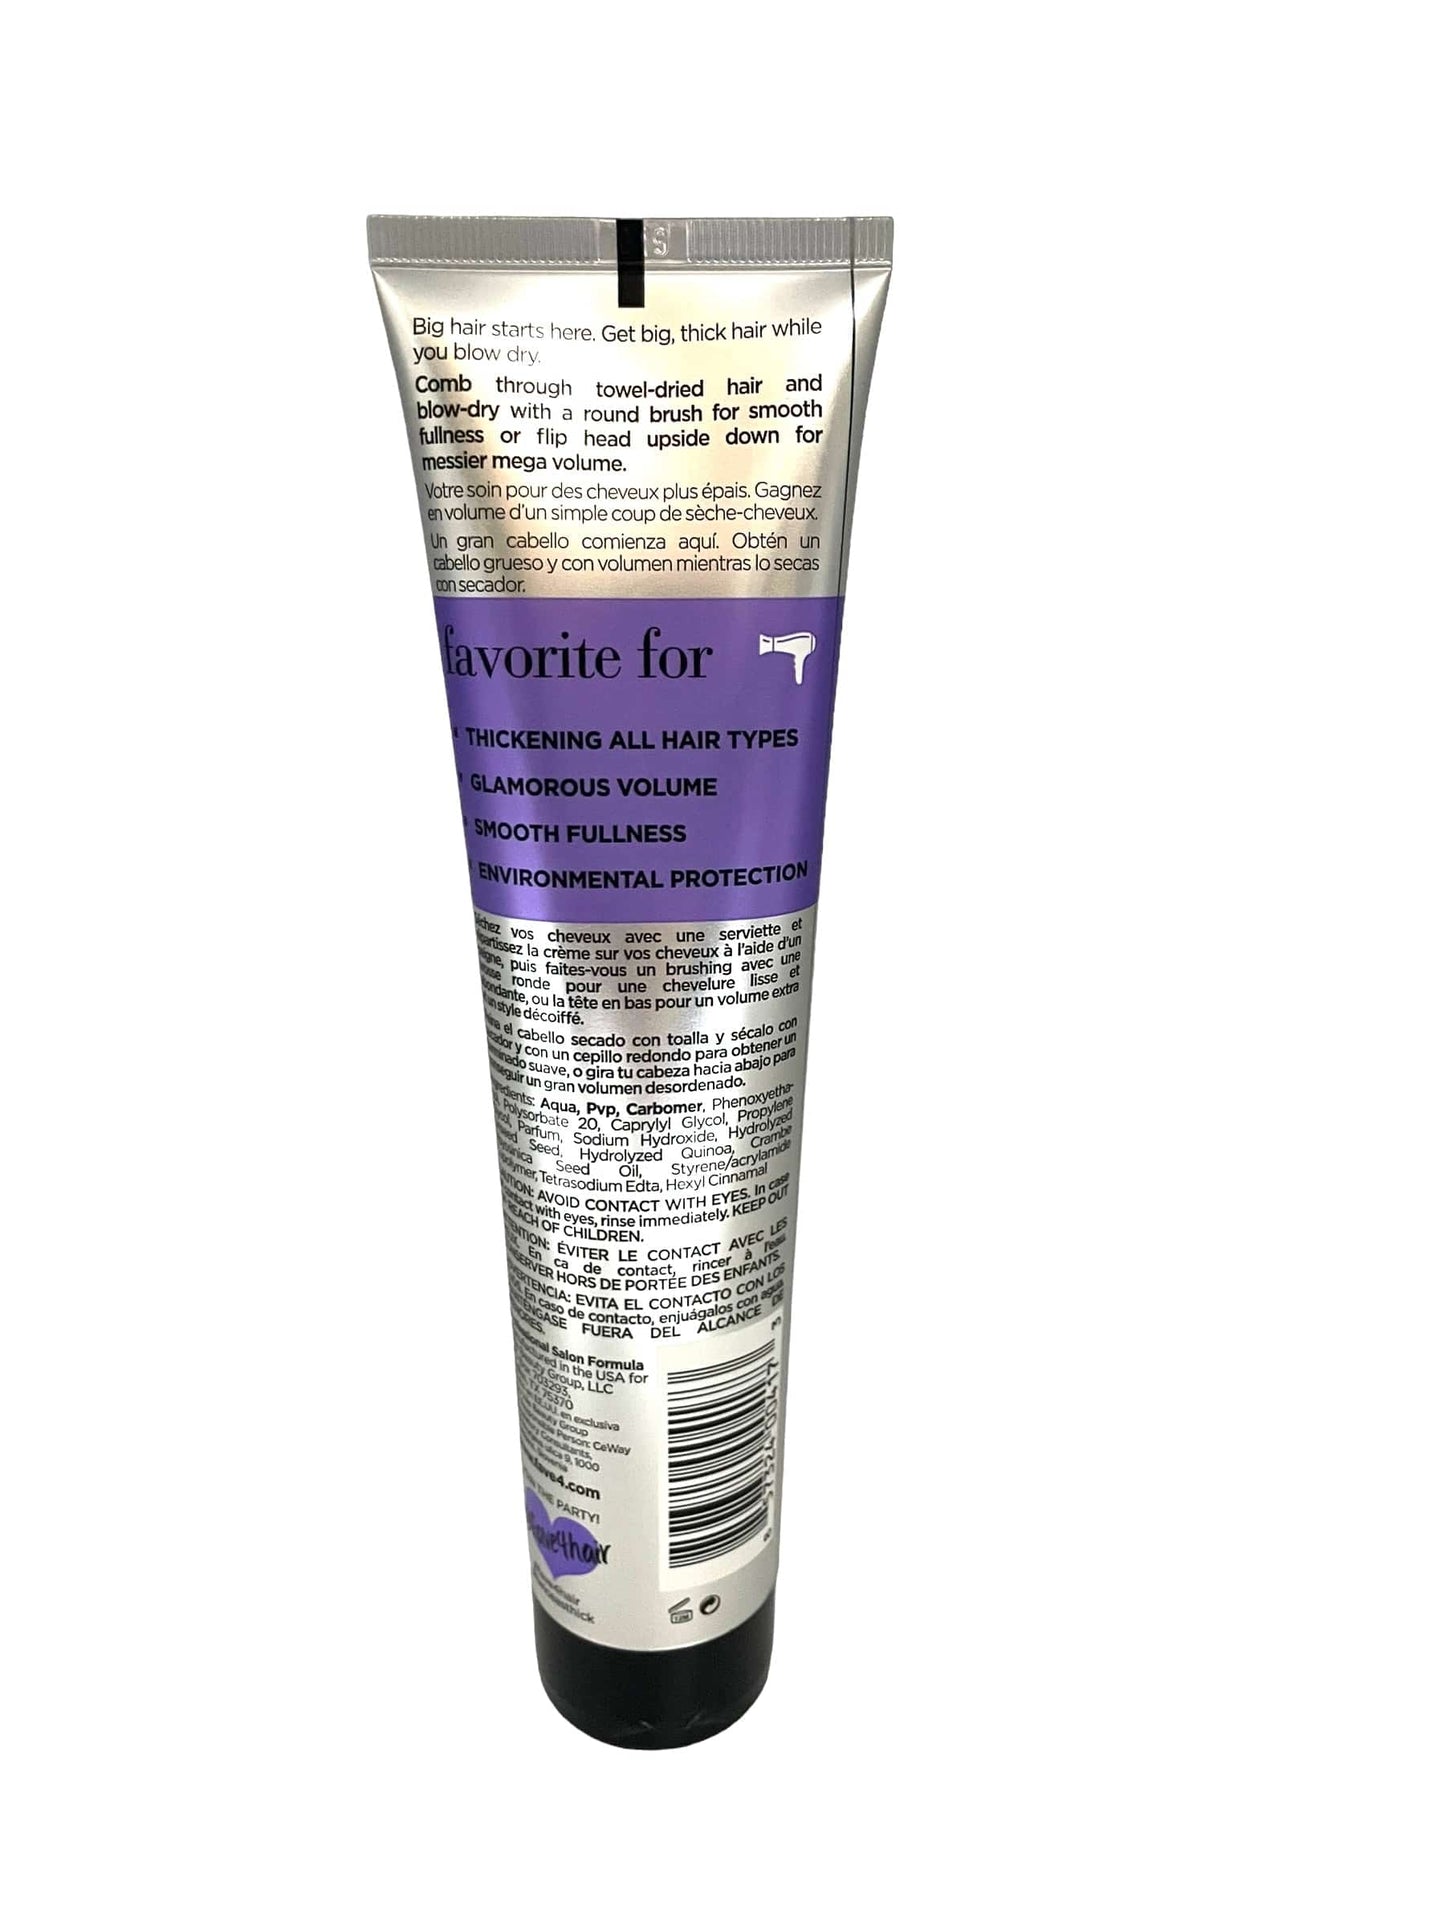 Fave4 Twice as Thick Thickening Cream 5.5 oz Hair Styling Products